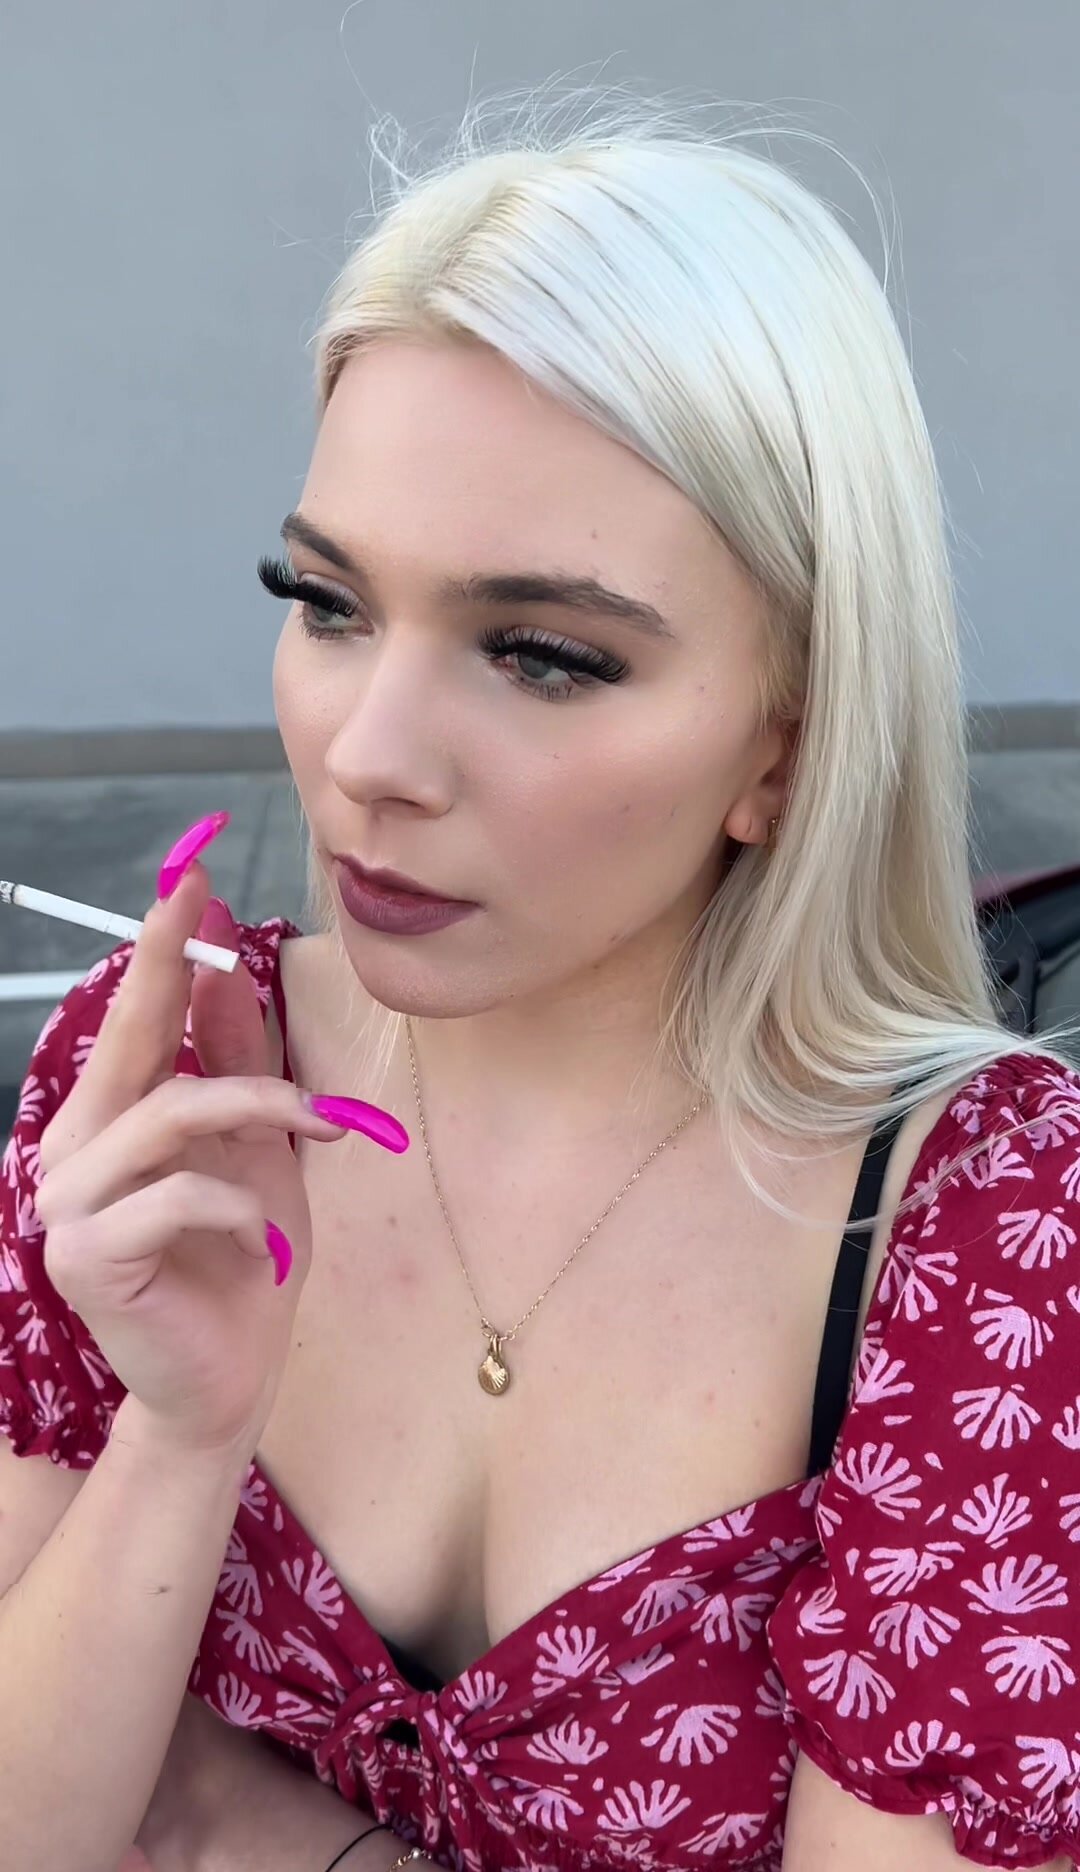 A nice blondie teen is smoking and spitting